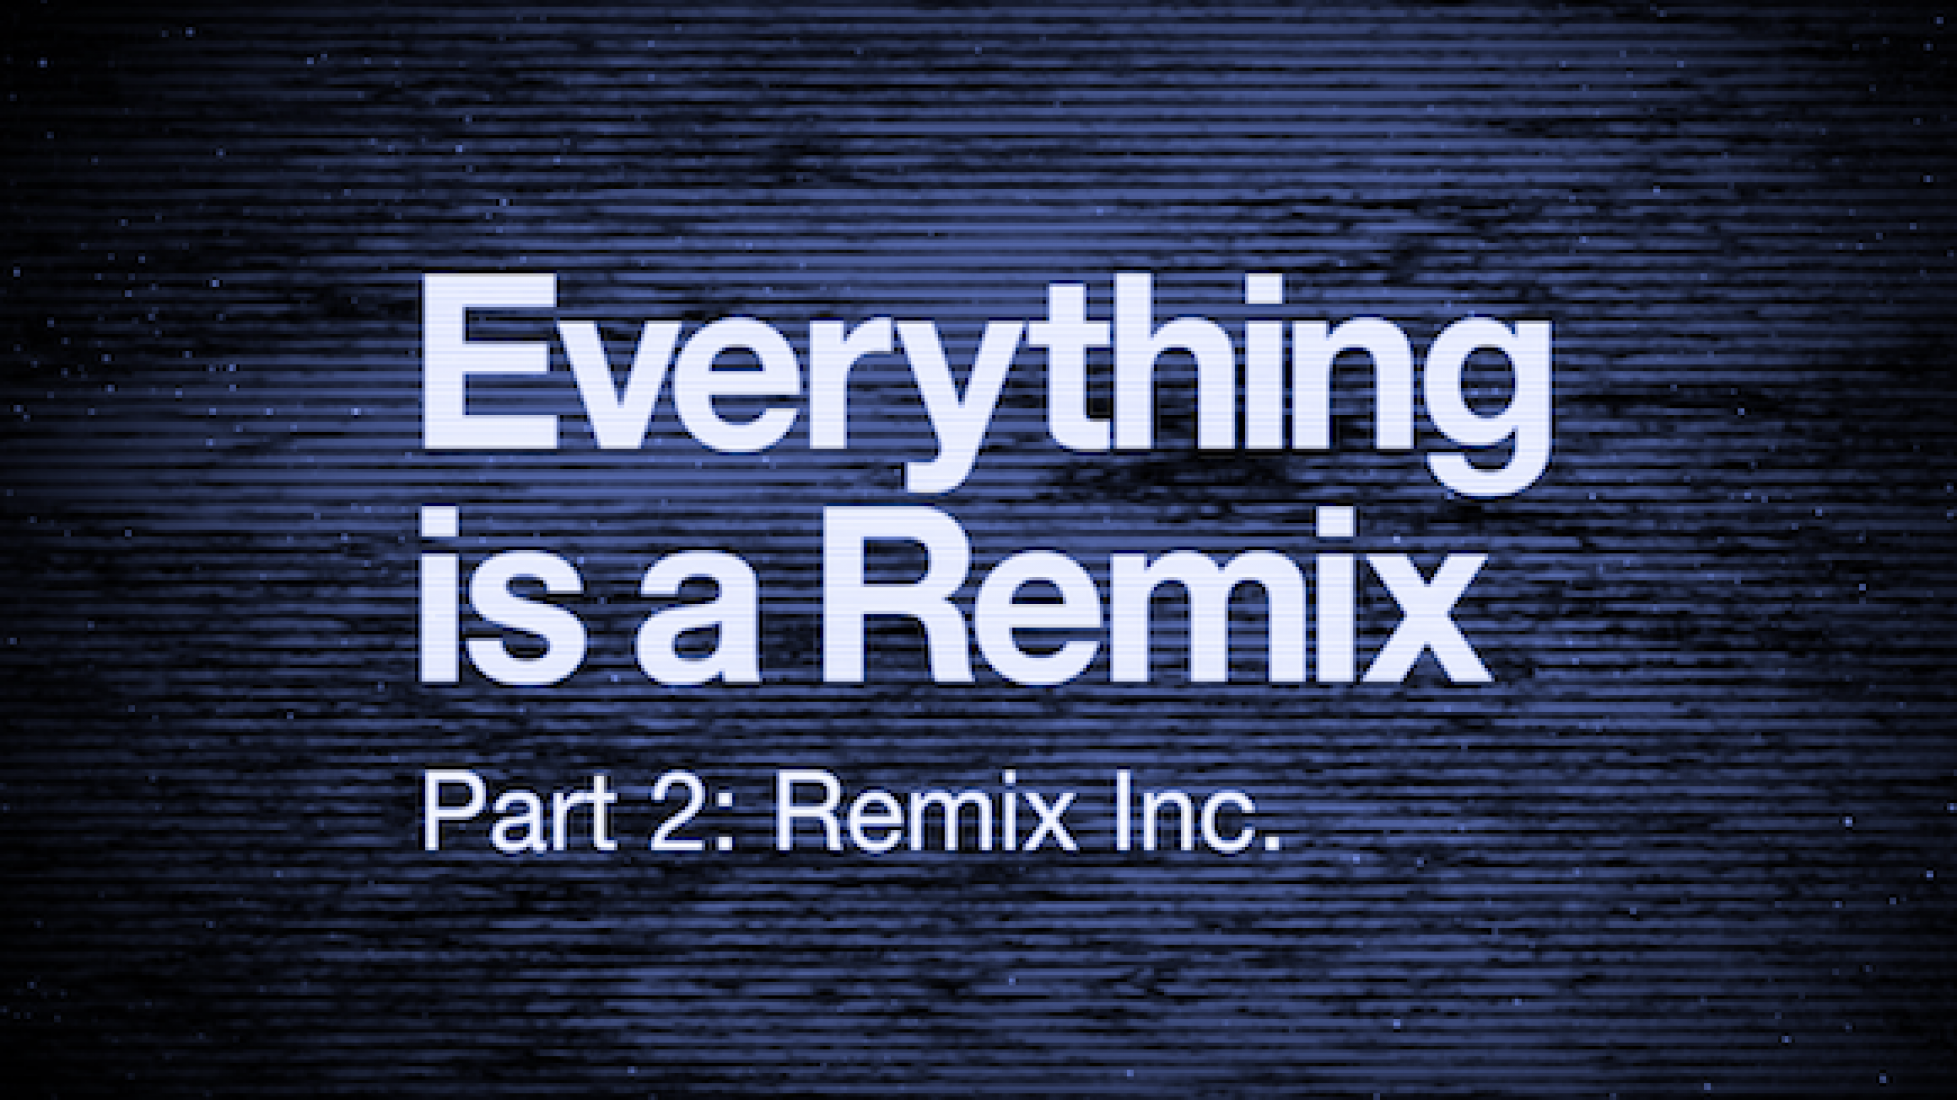 Now s everything. Everything is. Every thing is Remix. Everything is a Remix Remastered. Everything is everything.